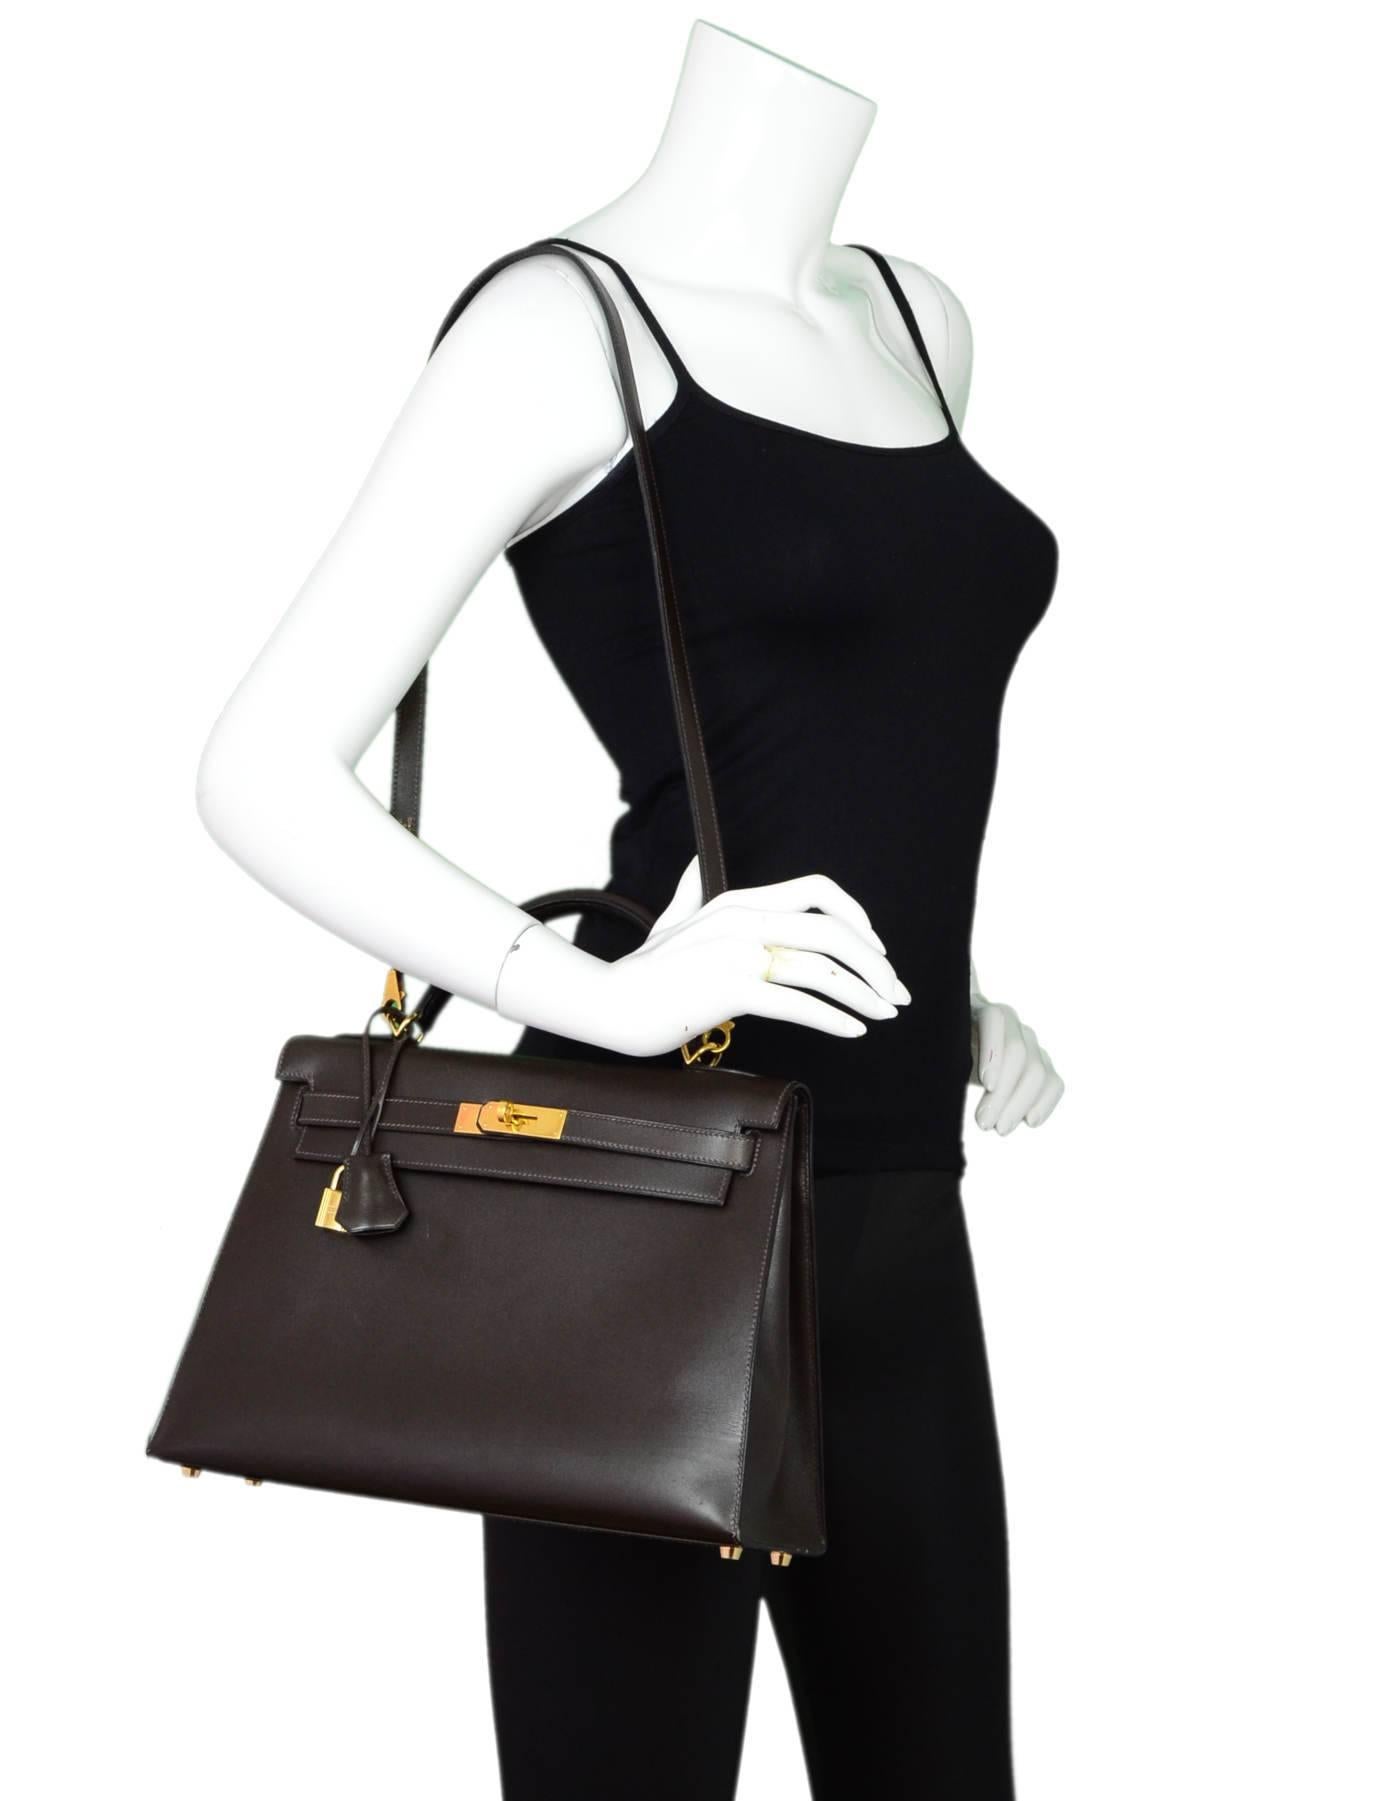 Hermes Brown Box Leather Sellier Rigid Kelly 32cm Bag 
Features removable shoulder/crossbody strap

Made In: France
Year of Production: 2000
Color: Brown
Hardware: Goldtone
Materials: Box leather, metal
Lining: Brown leather
Closure/opening: Flap